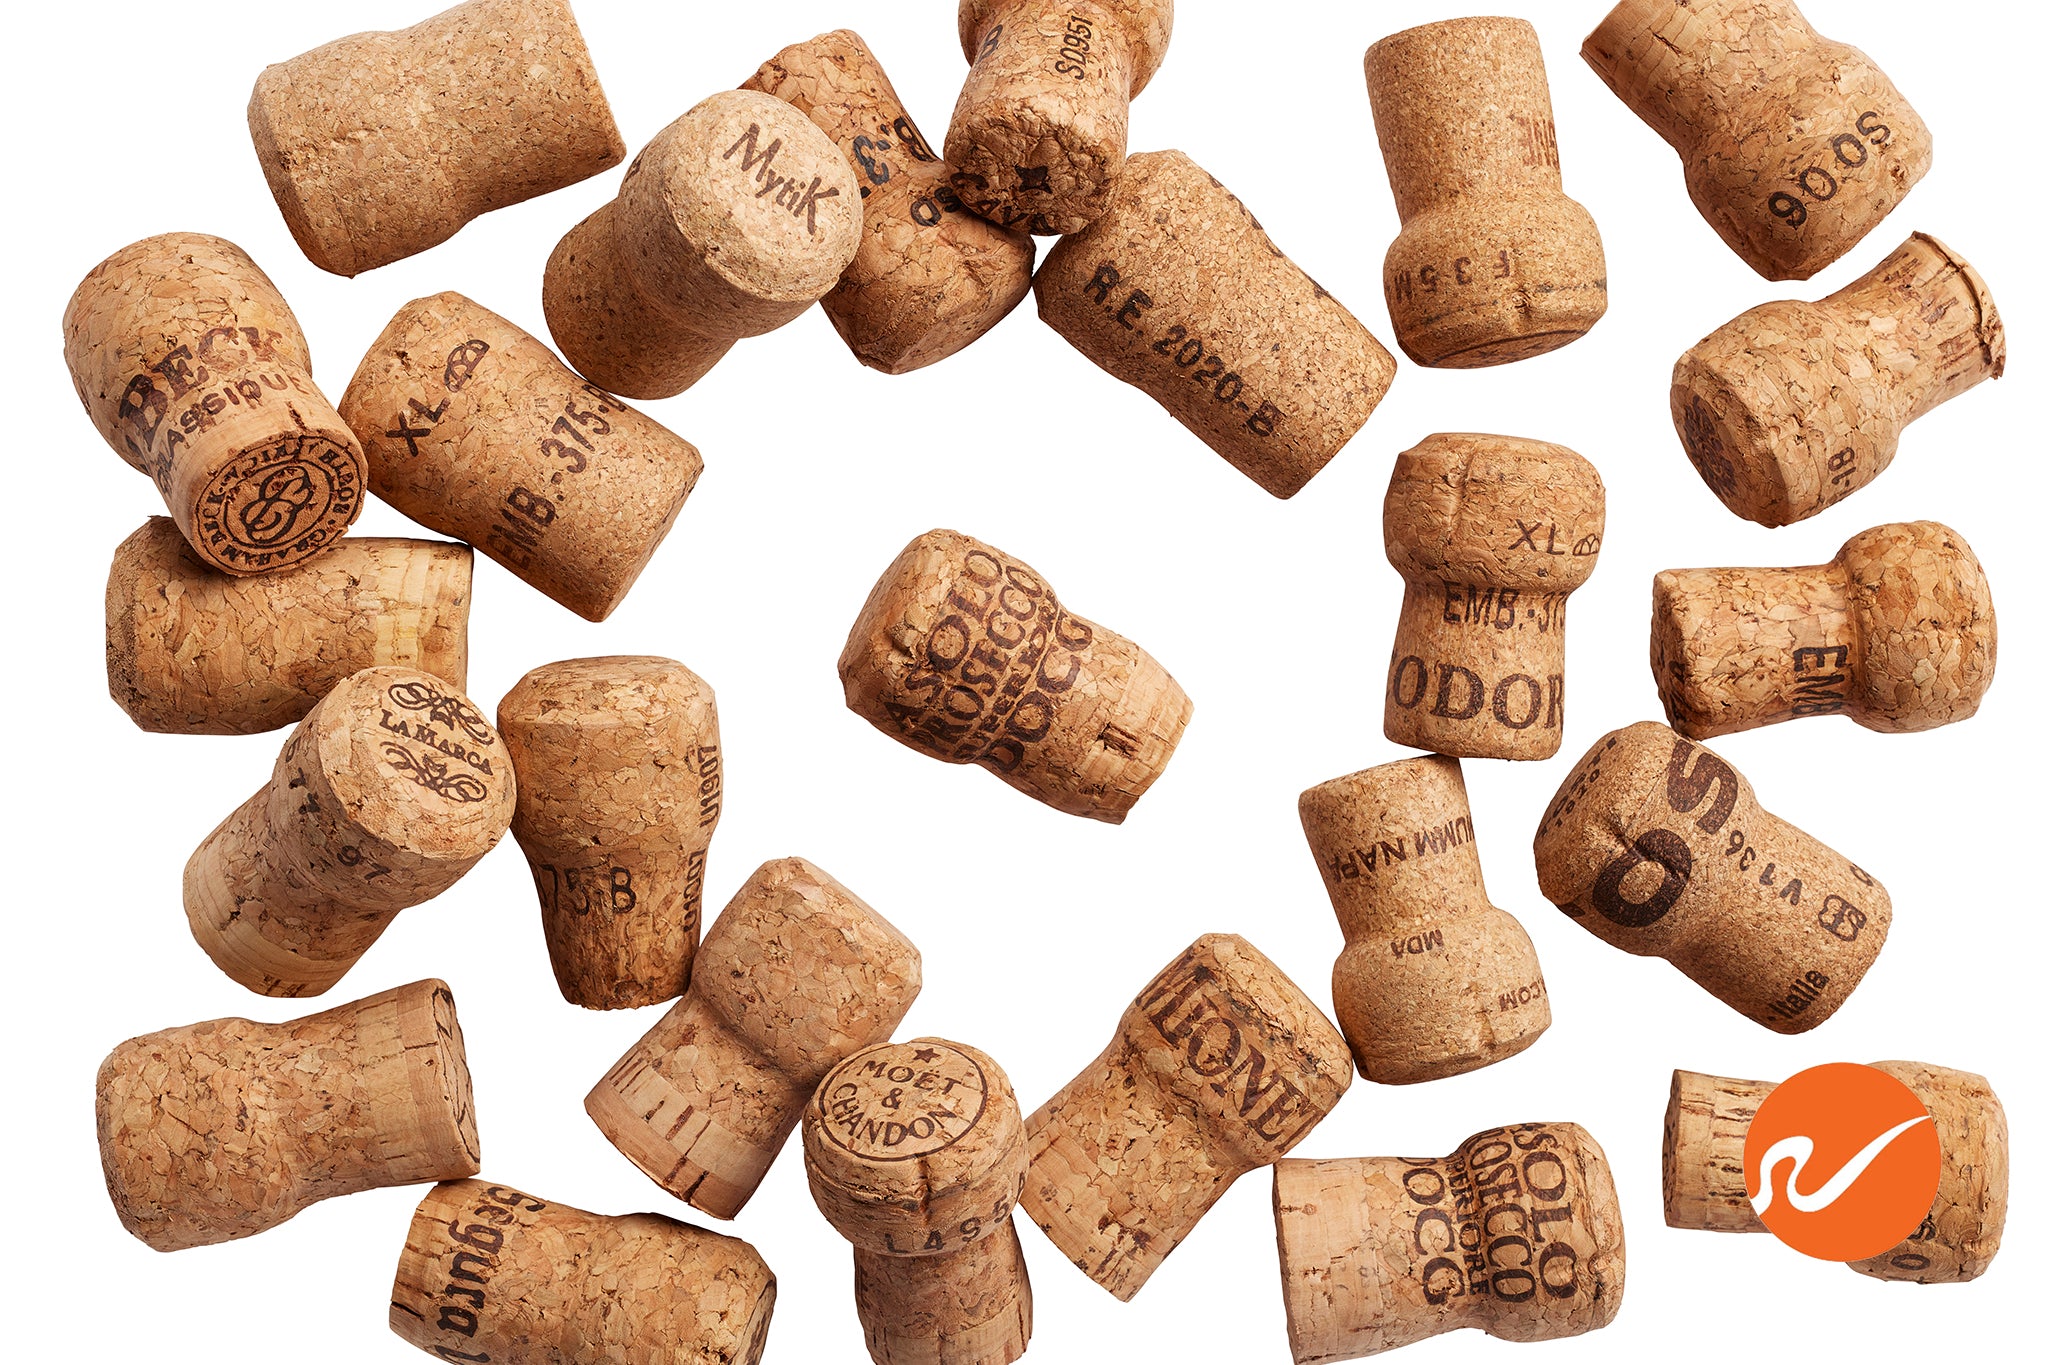 Champagne Corks, Cork, All Natural Corks, Recycled Used Corks